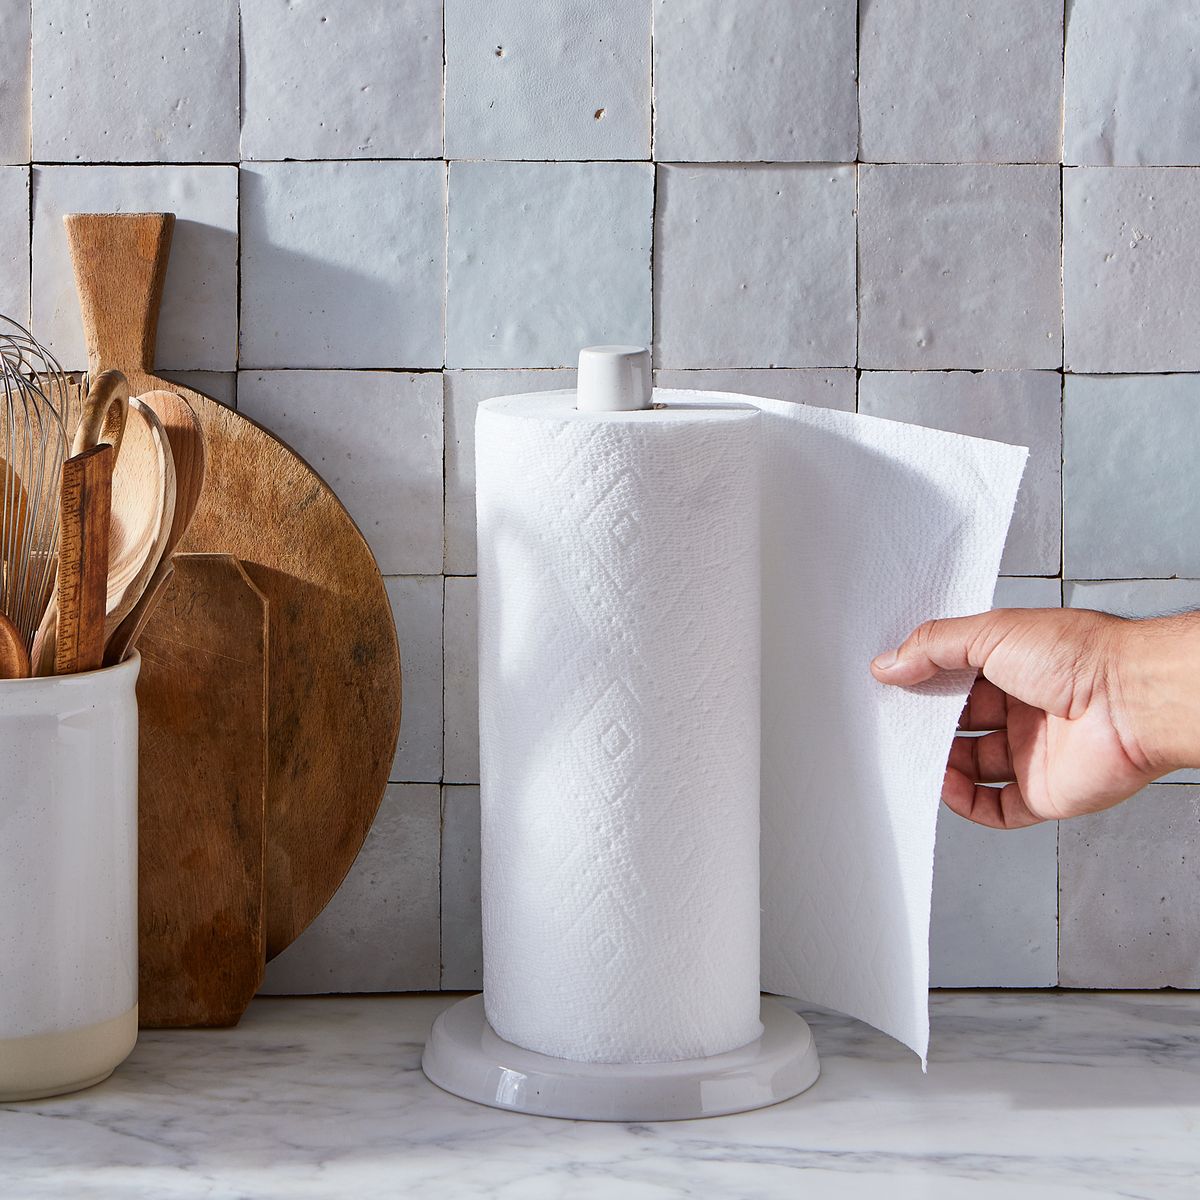 Why You Should Be Using Bamboo Paper Towels